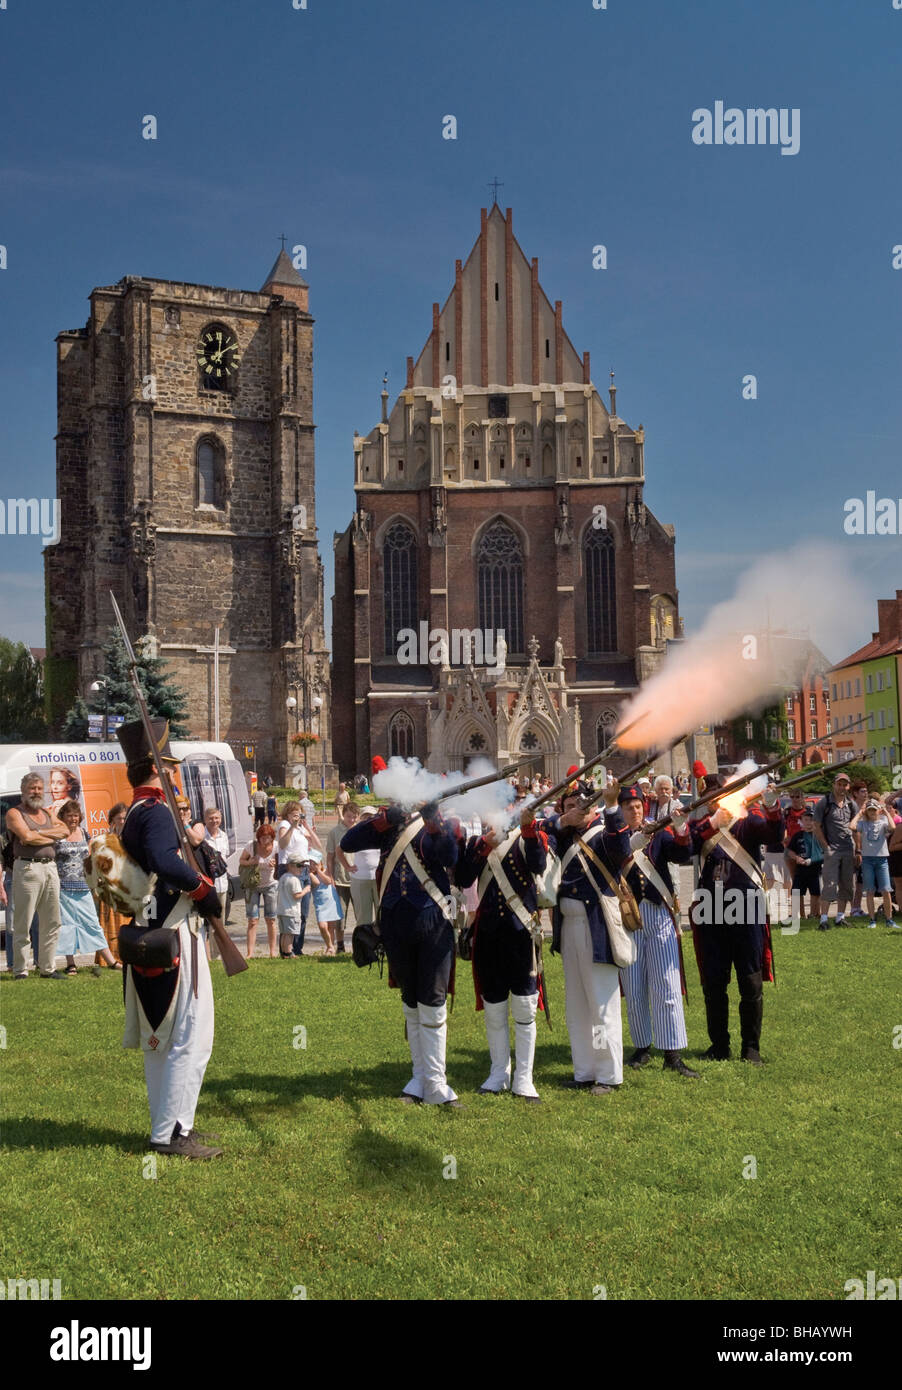 Reenactors firing muskets at Market Square at Reenactment of 1807 Siege of Neisse in Napoleonic War with Prussia at Nysa, Poland Stock Photo